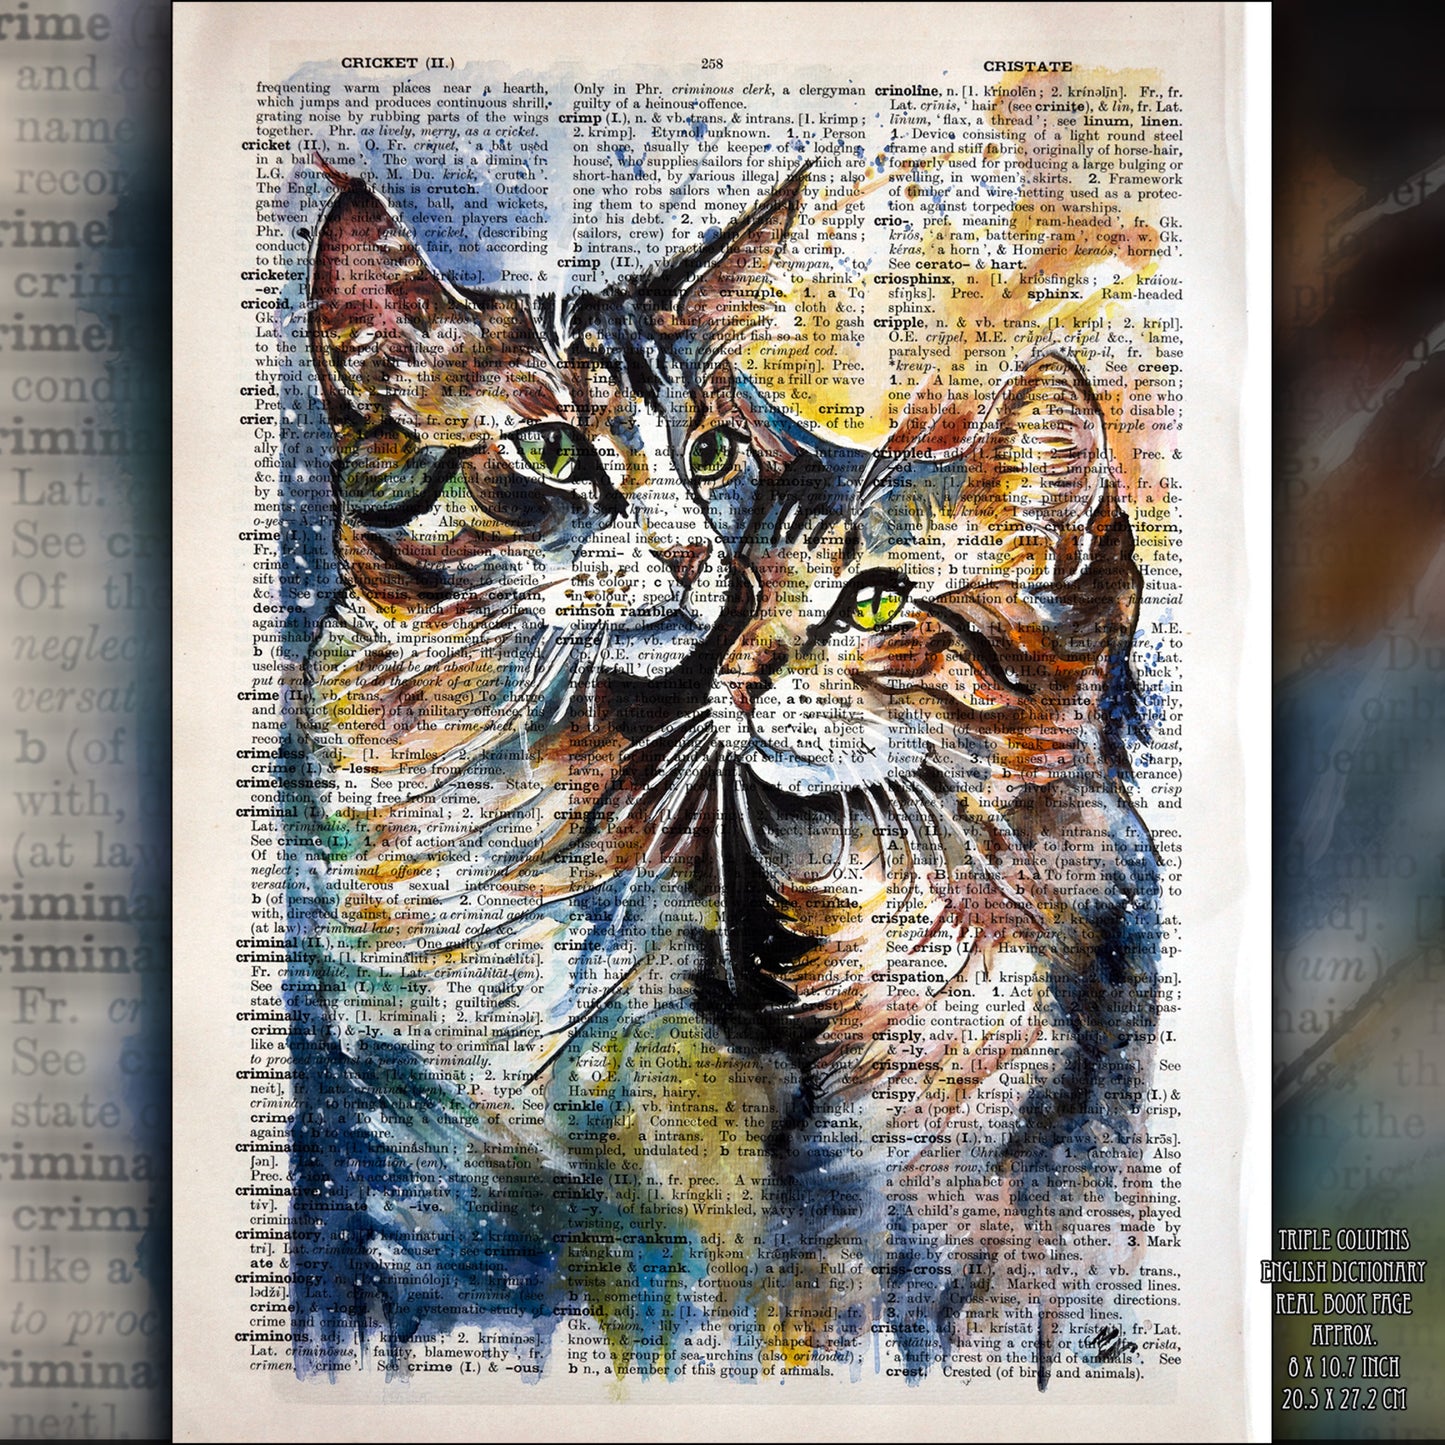 Digital art "Colorful Companions" by Malgorzata Nierobisz, featuring two vibrant cats on a vintage dictionary page.